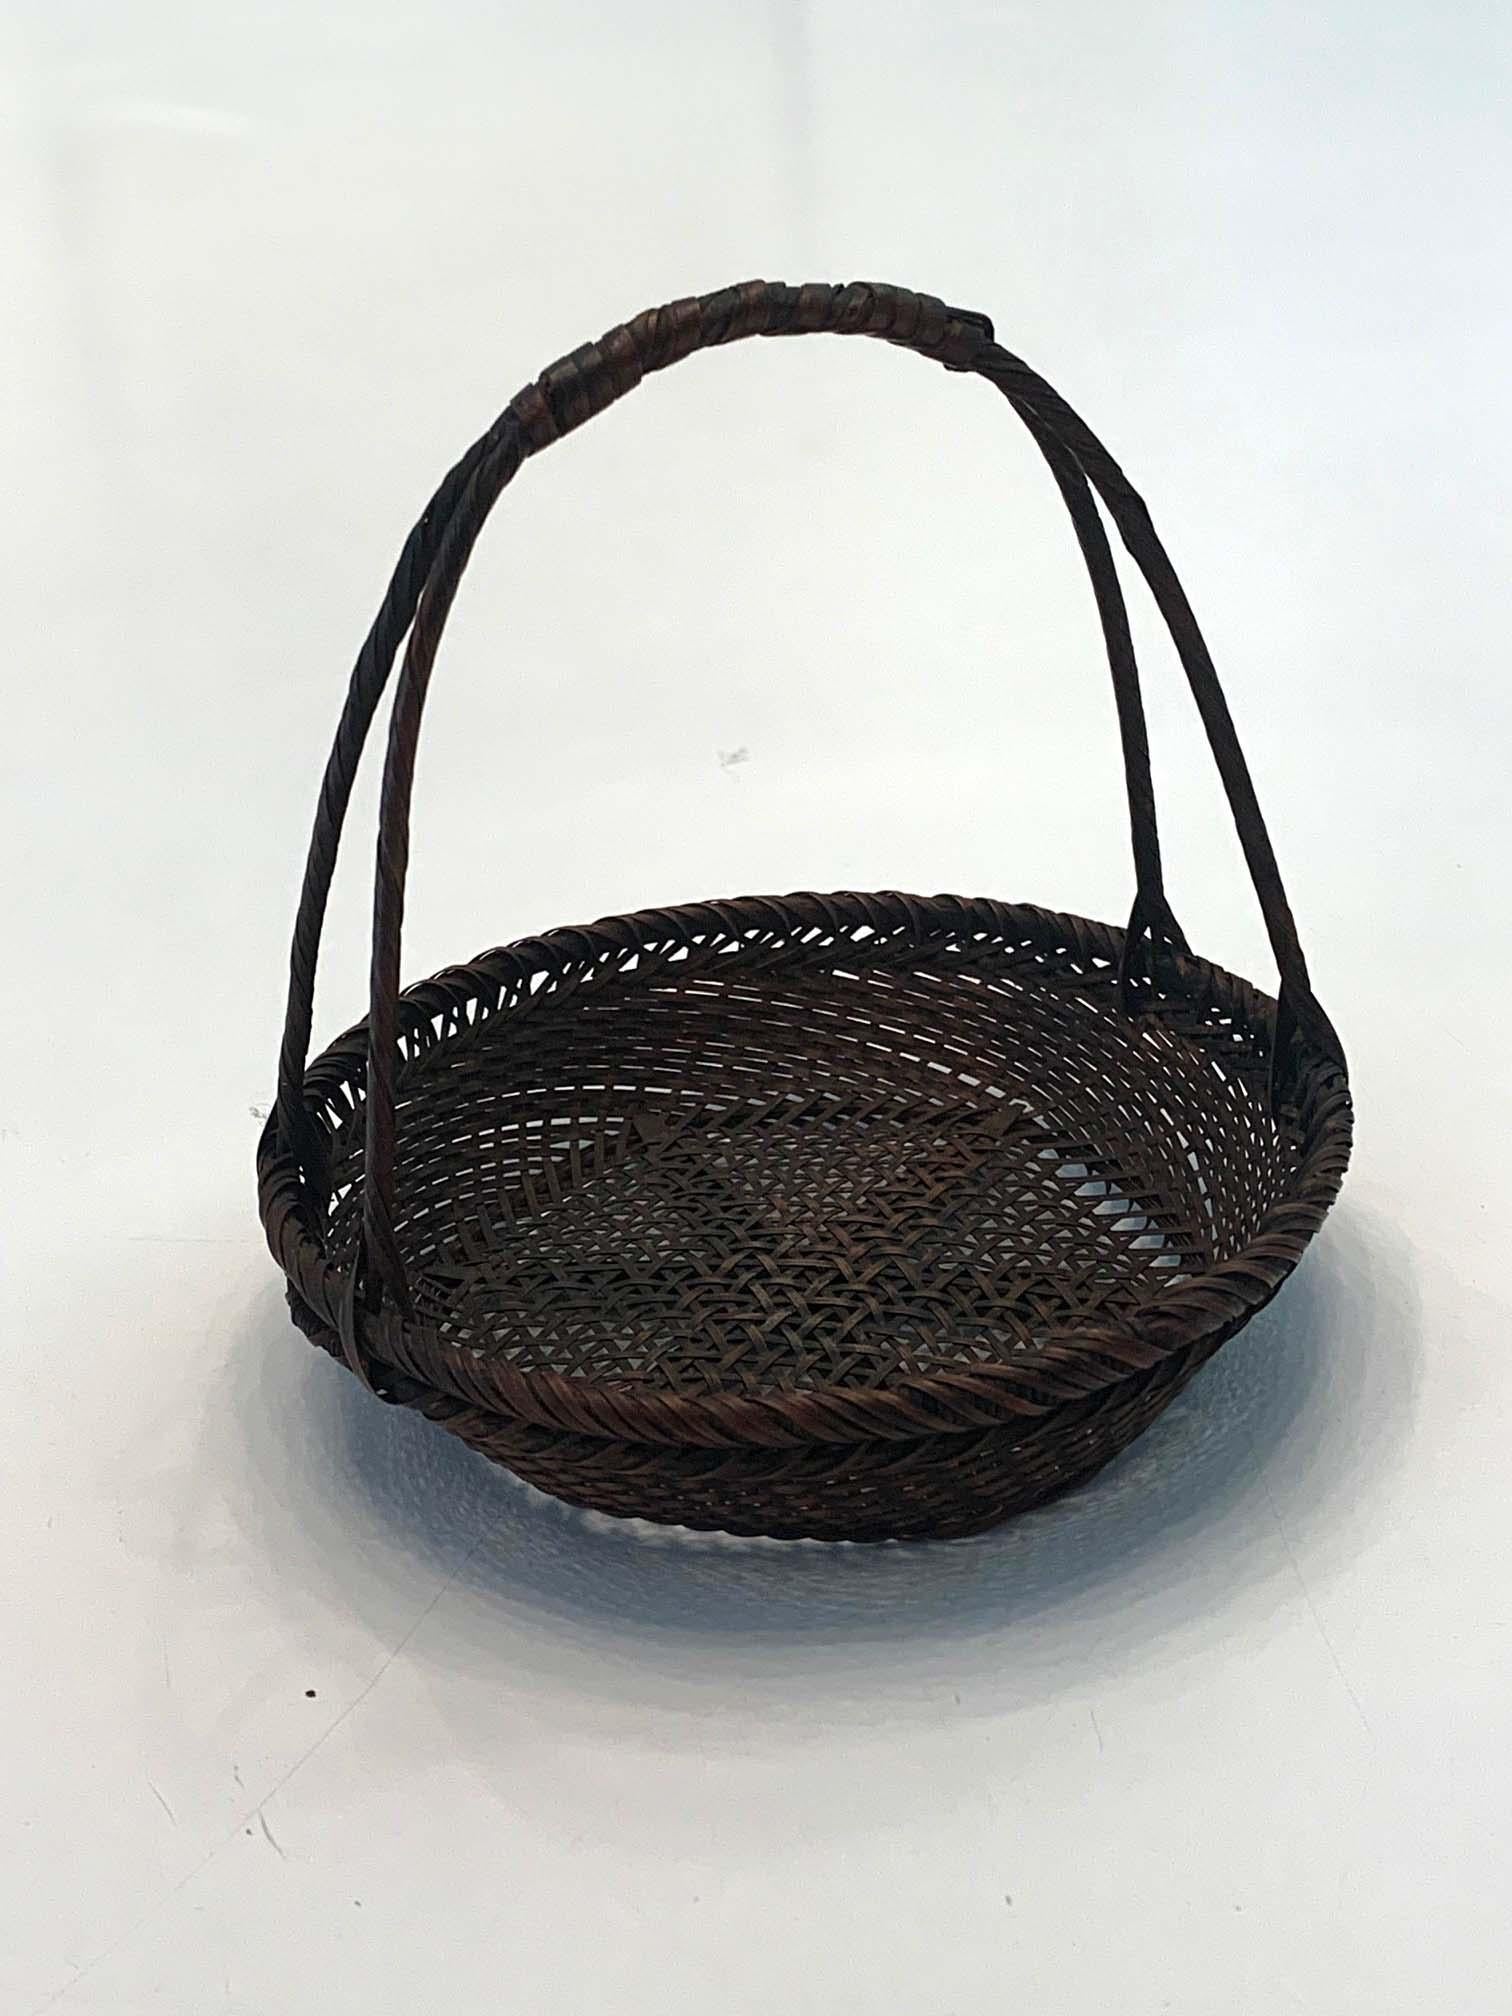 A miniature bamboo basket woven by Hayakawa Shokosai I (1815-1897) circa 1885, an important example of the work by the artist who is considered as the founding father of Japanese modern bamboo art and the first ever signed his own work thus